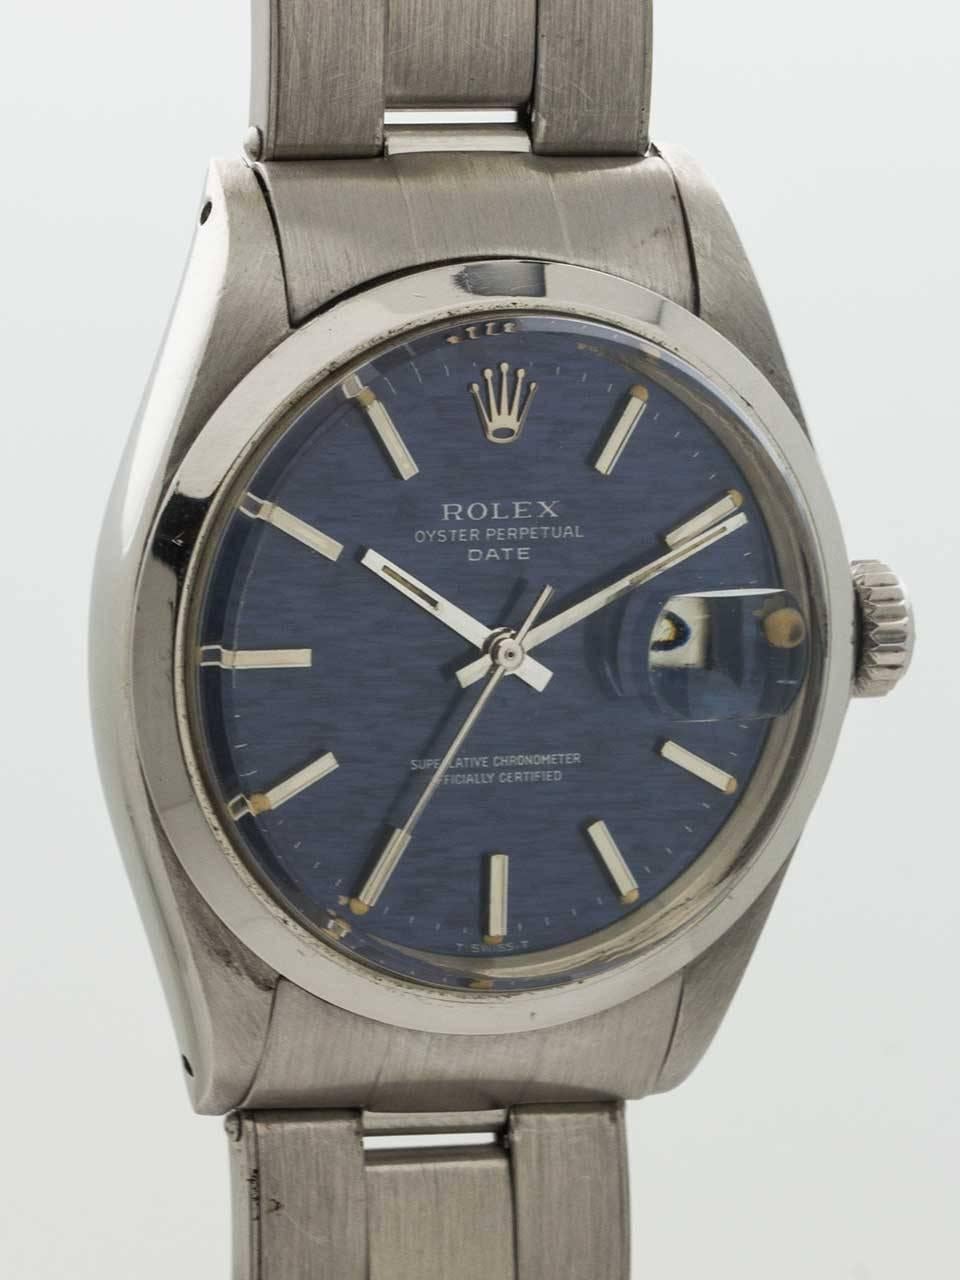 Rolex Stainless Steel Oyster Perpetual Date ref 1500 serial # 2.5 million circa 1970. 34mm diameter Oyster case with smooth bezel and acrylic crystal. Original blue linen textured dial with applied indexes, crown logo and hands. Powered by self